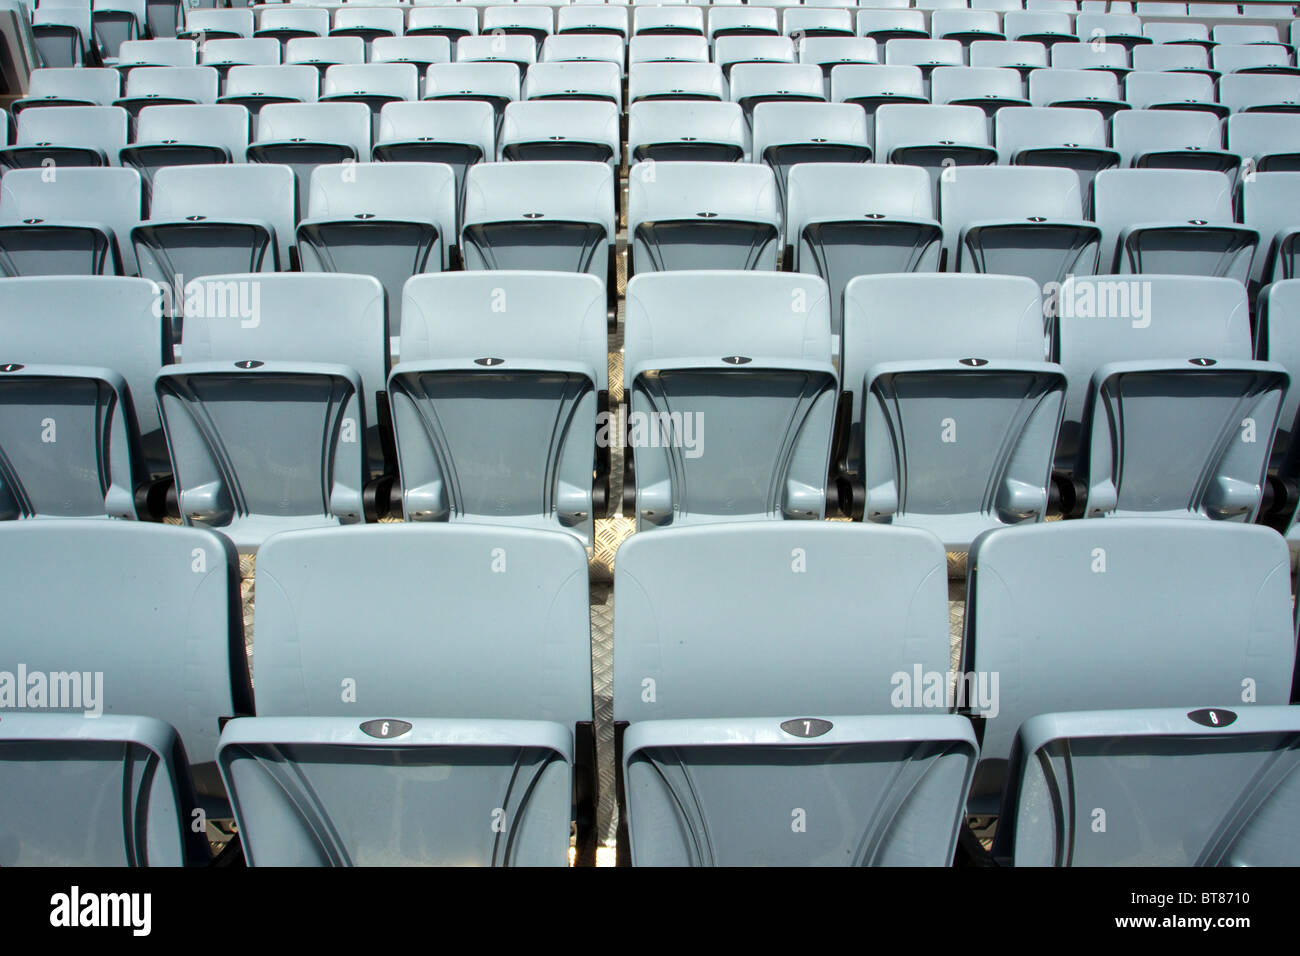 Seats On The South Stand At Eden Park Stadium Auckland New Zealand Sunday October 10 2010 Stock Photo Alamy